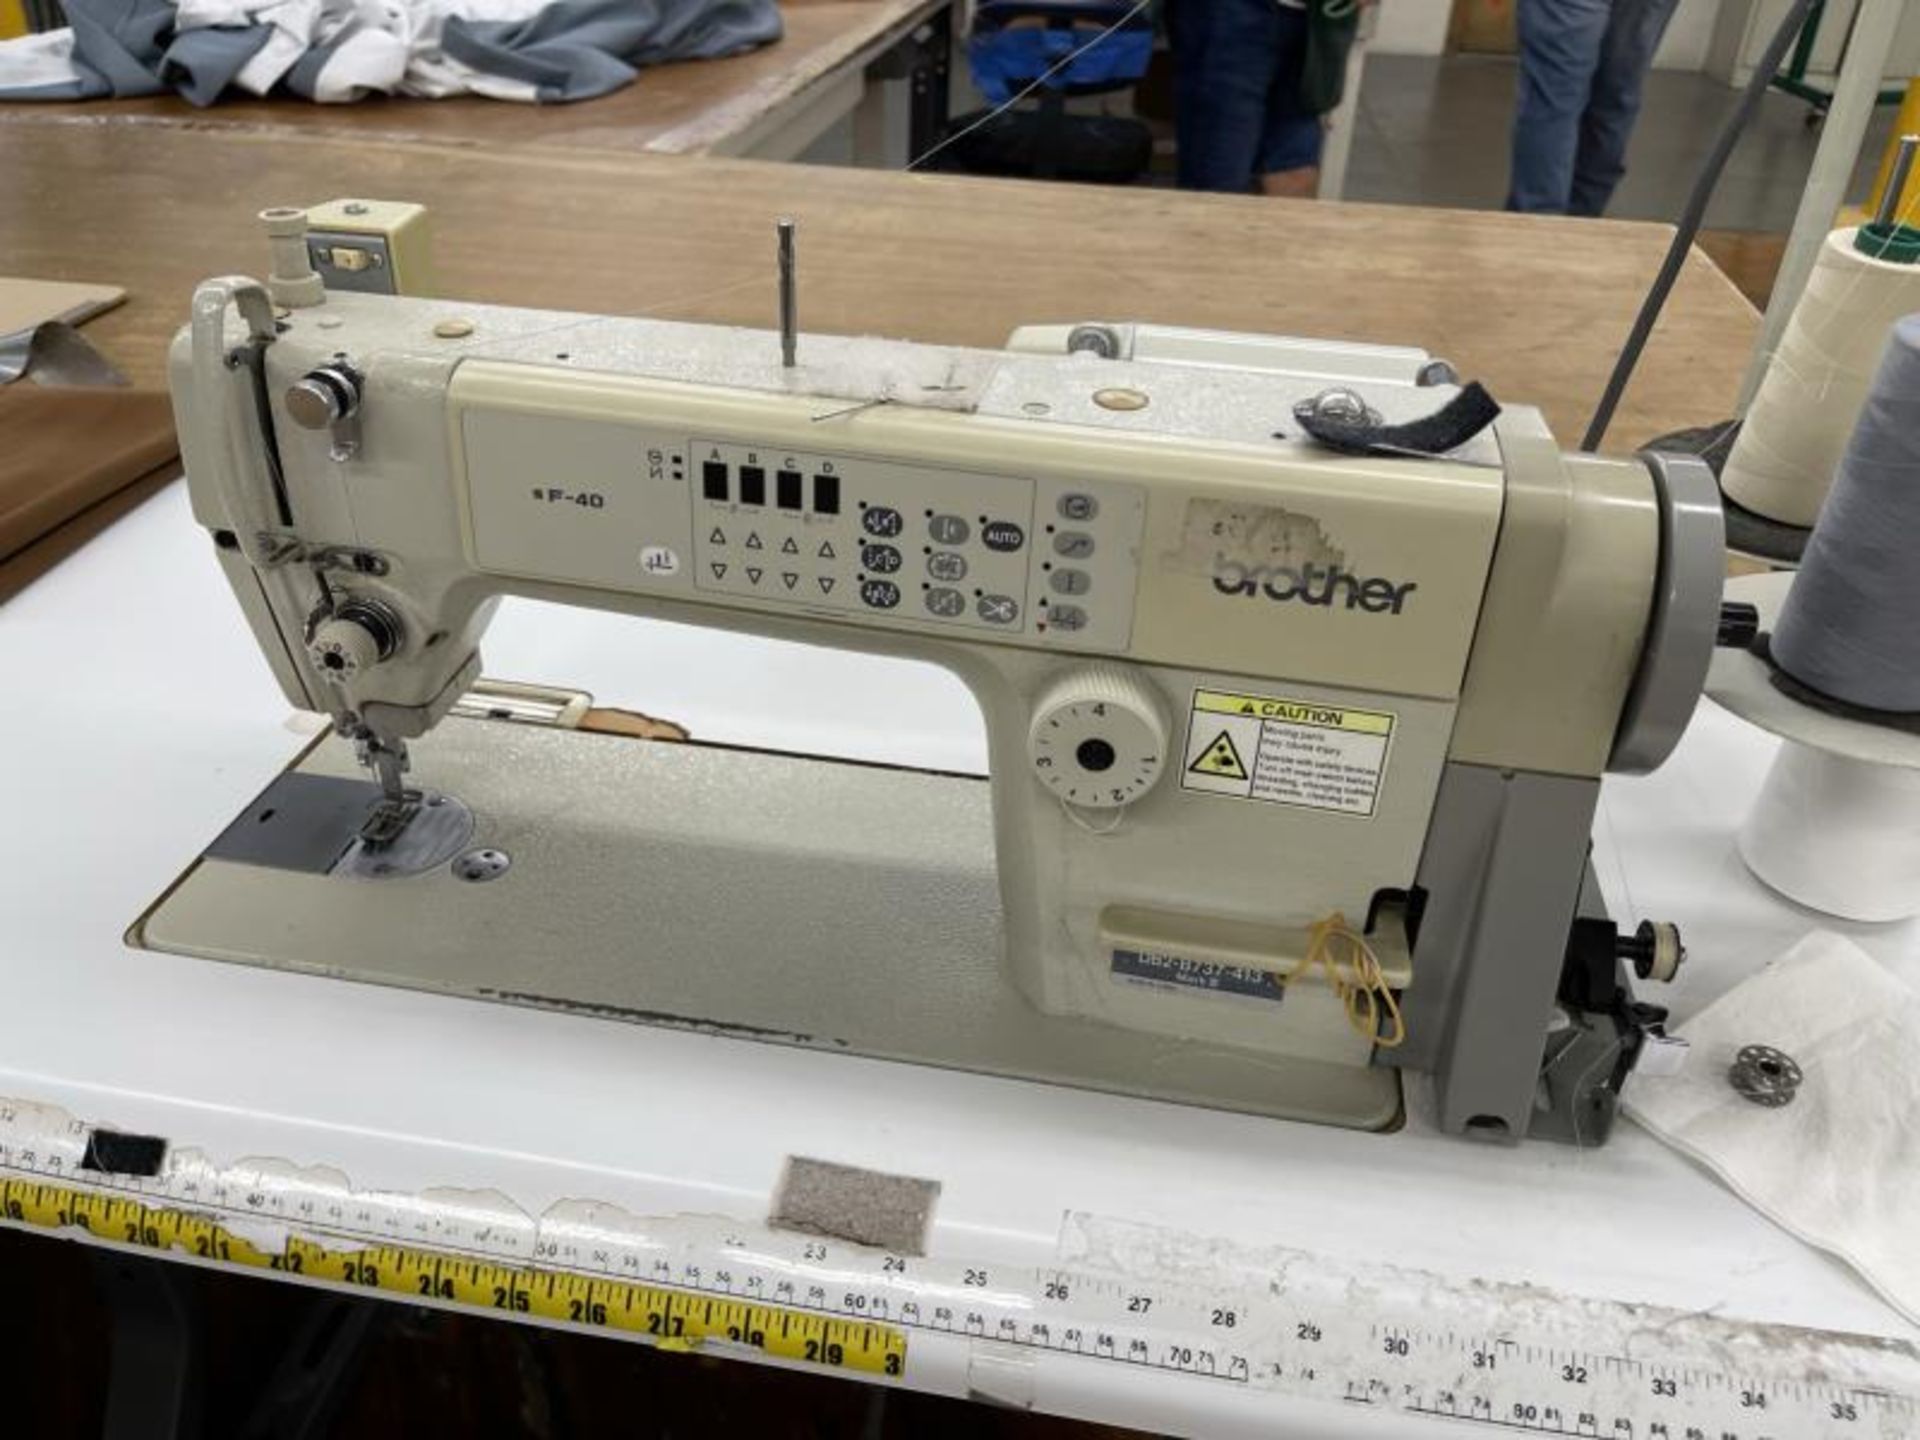 Brother Exedra Sewing Machine M: DB2-B737-413 (F-40) SN: E8097113 - Image 2 of 3